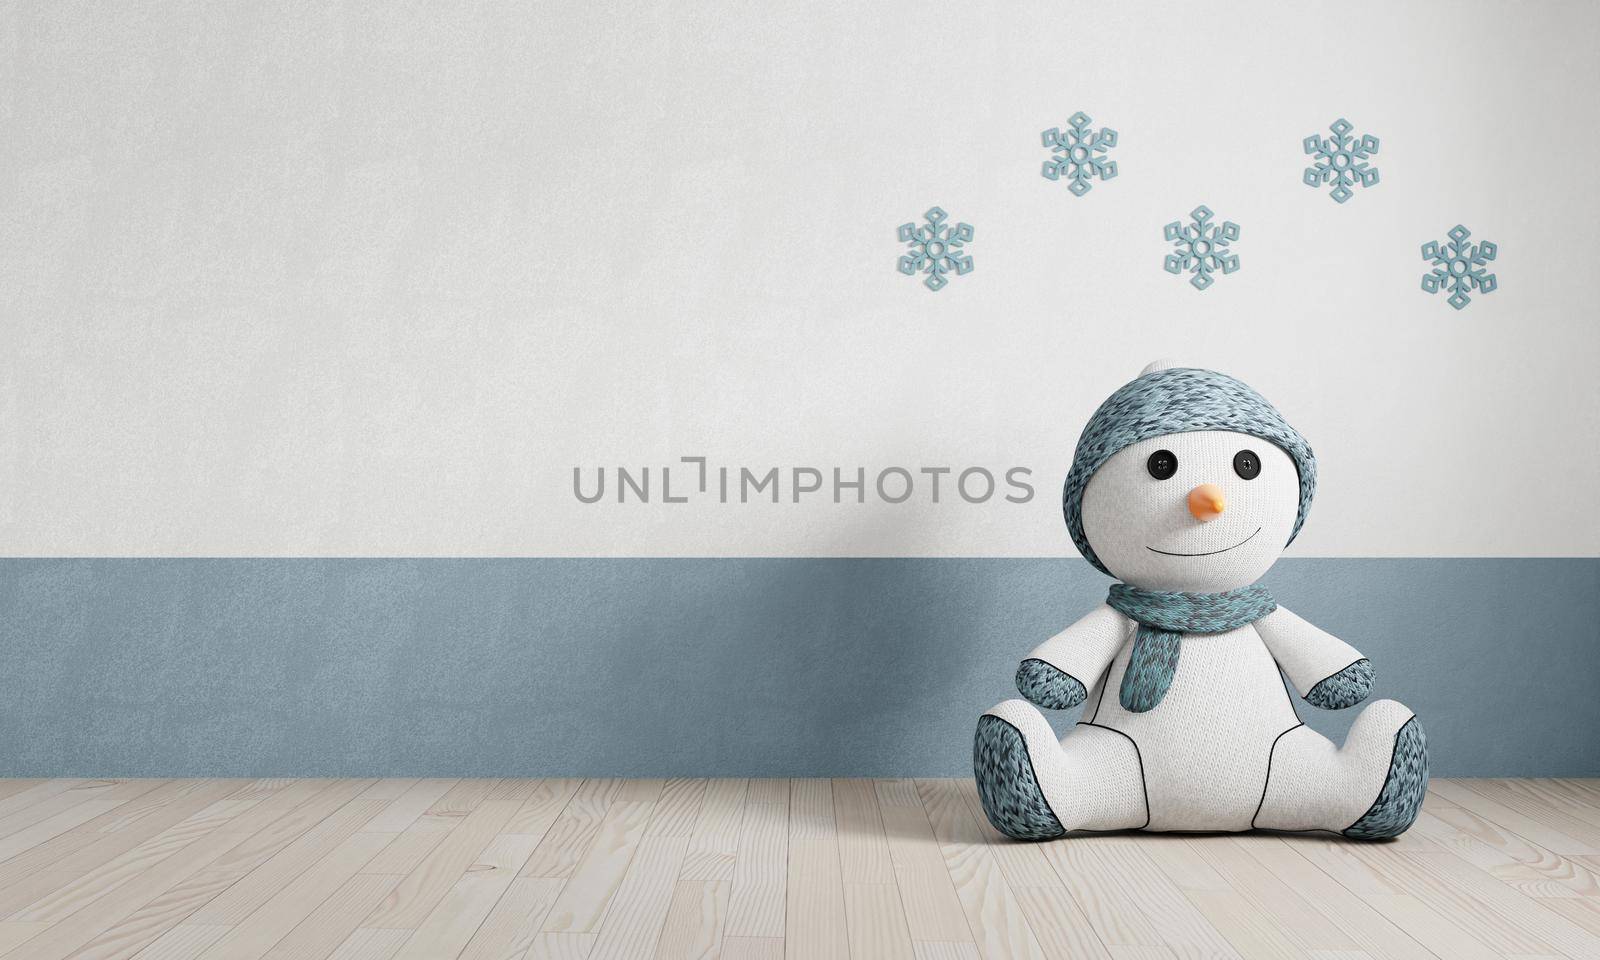 Snowman doll with snowflake wallpaper in empty room with copy space background. Interior and kids room concept. 3D illustration rendering